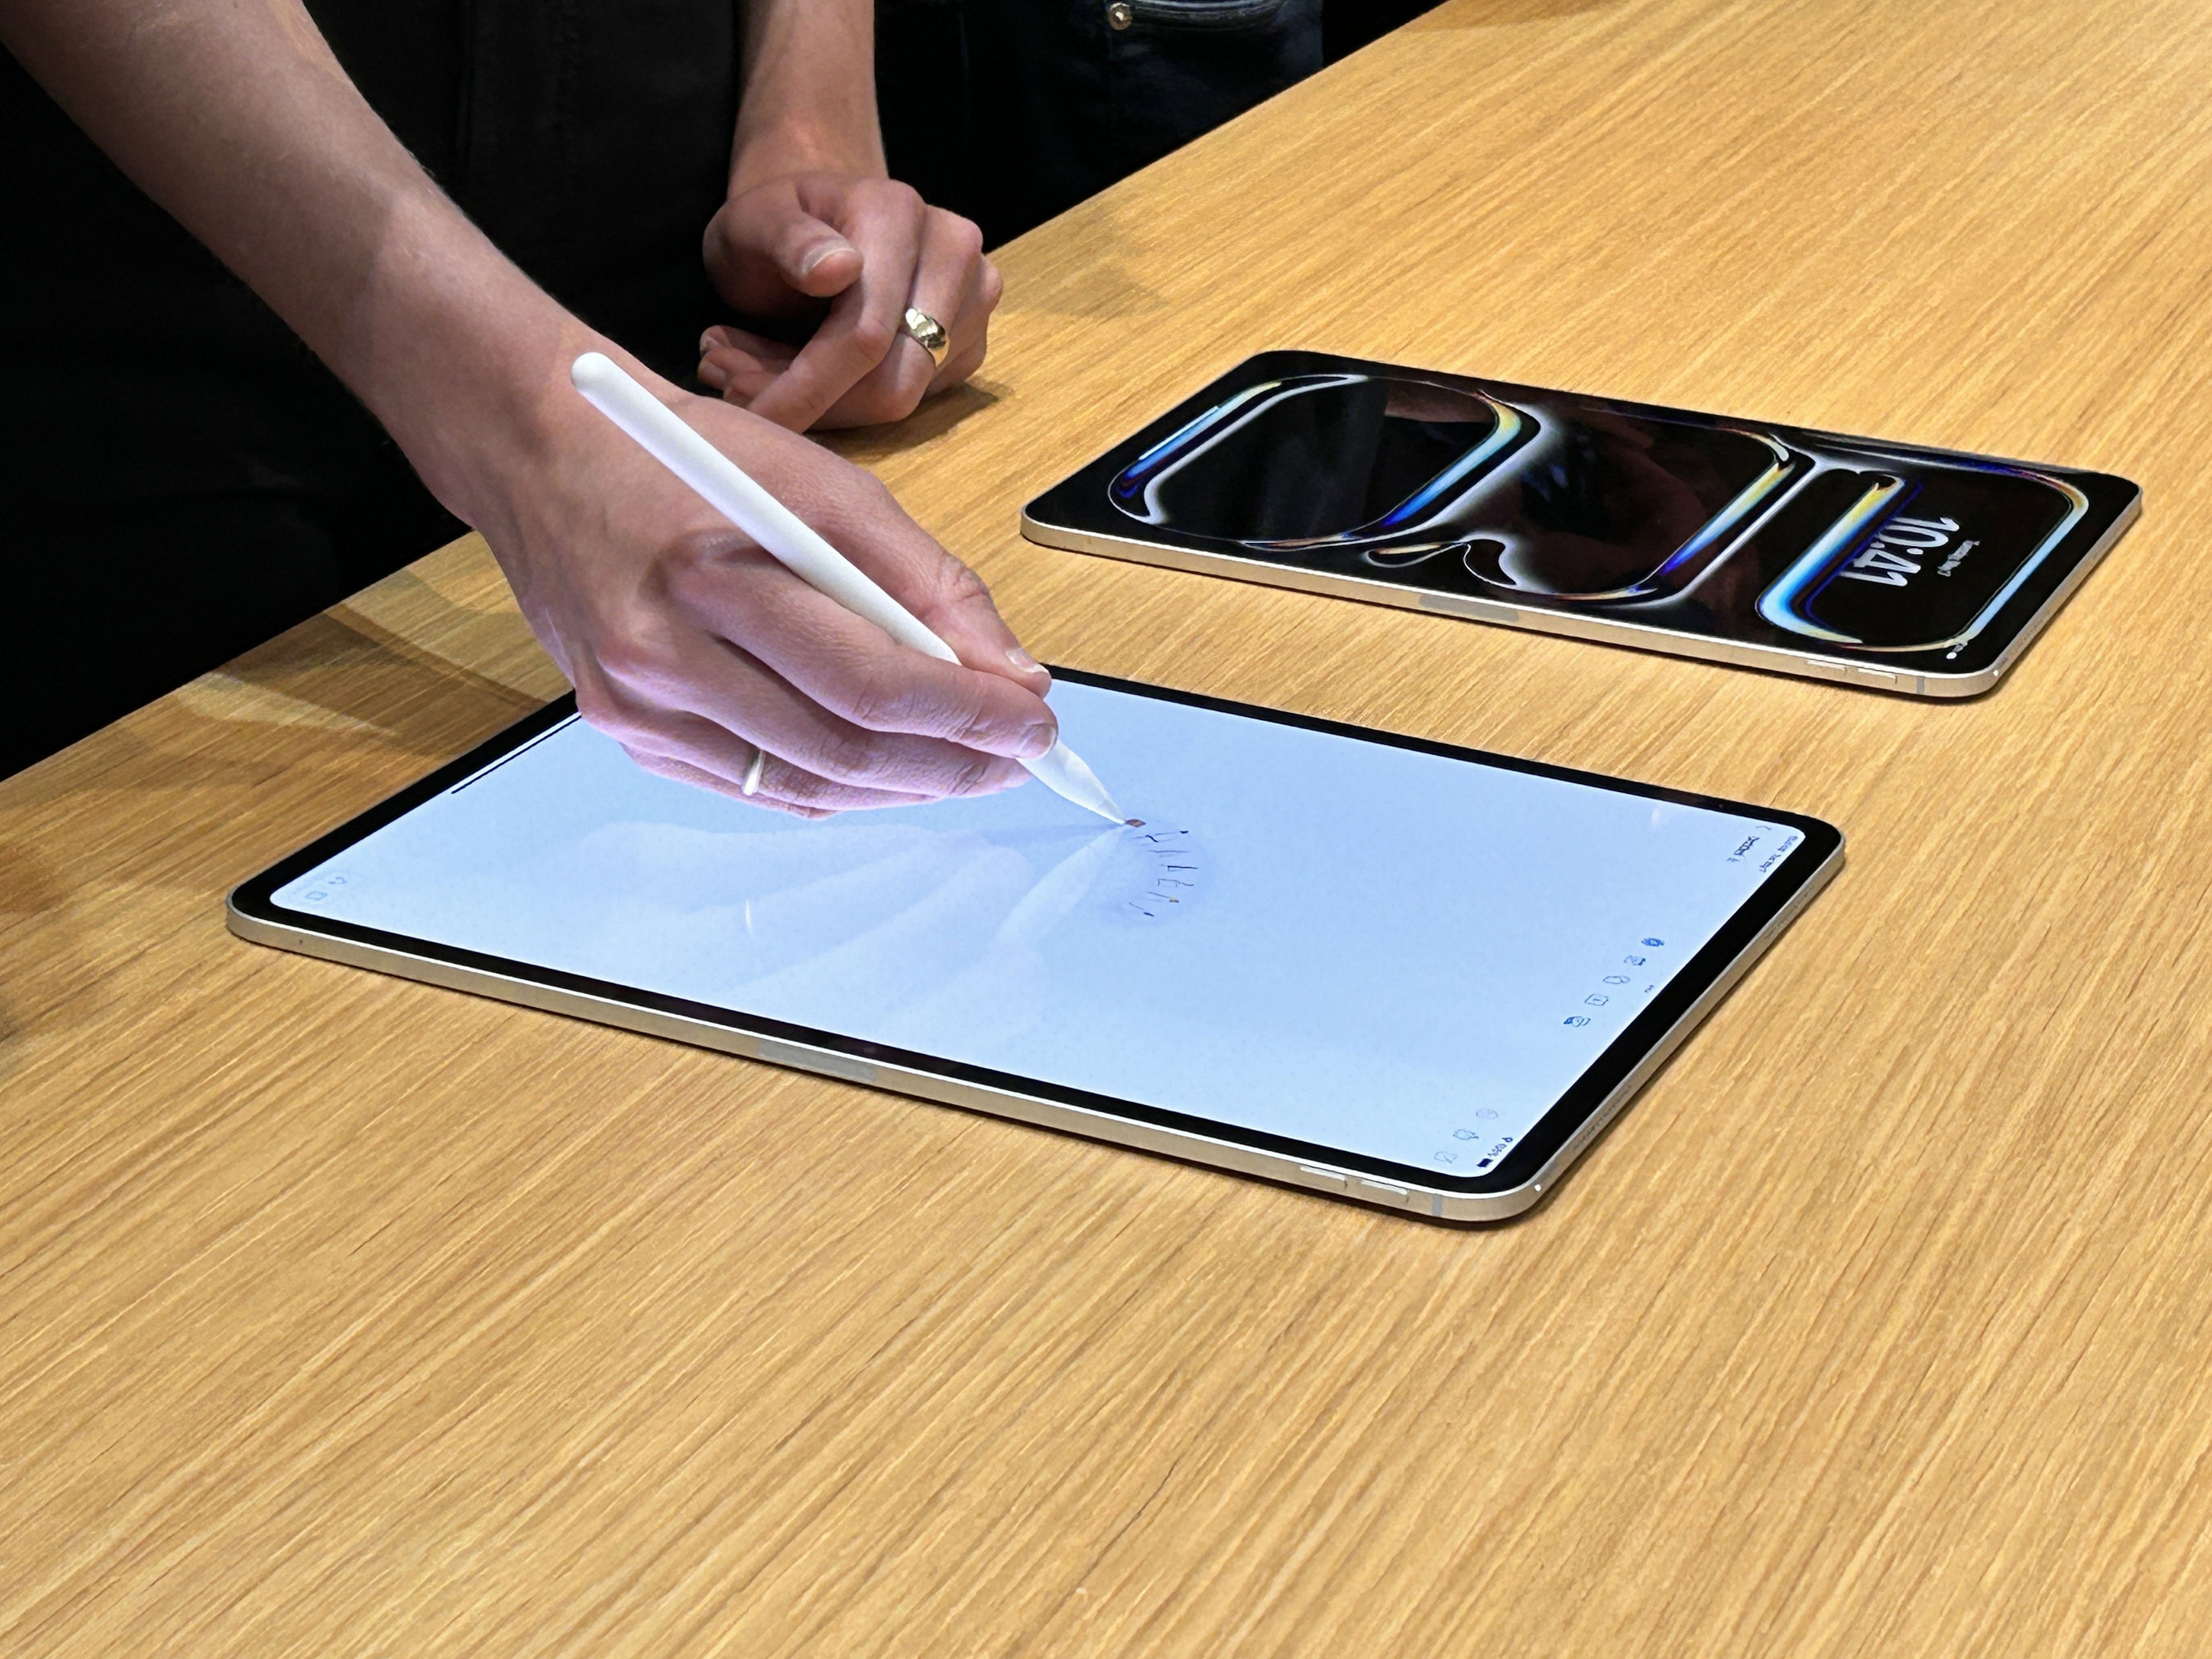 apple pencil pro hands-on: squeeze, roll, hover — oh my!